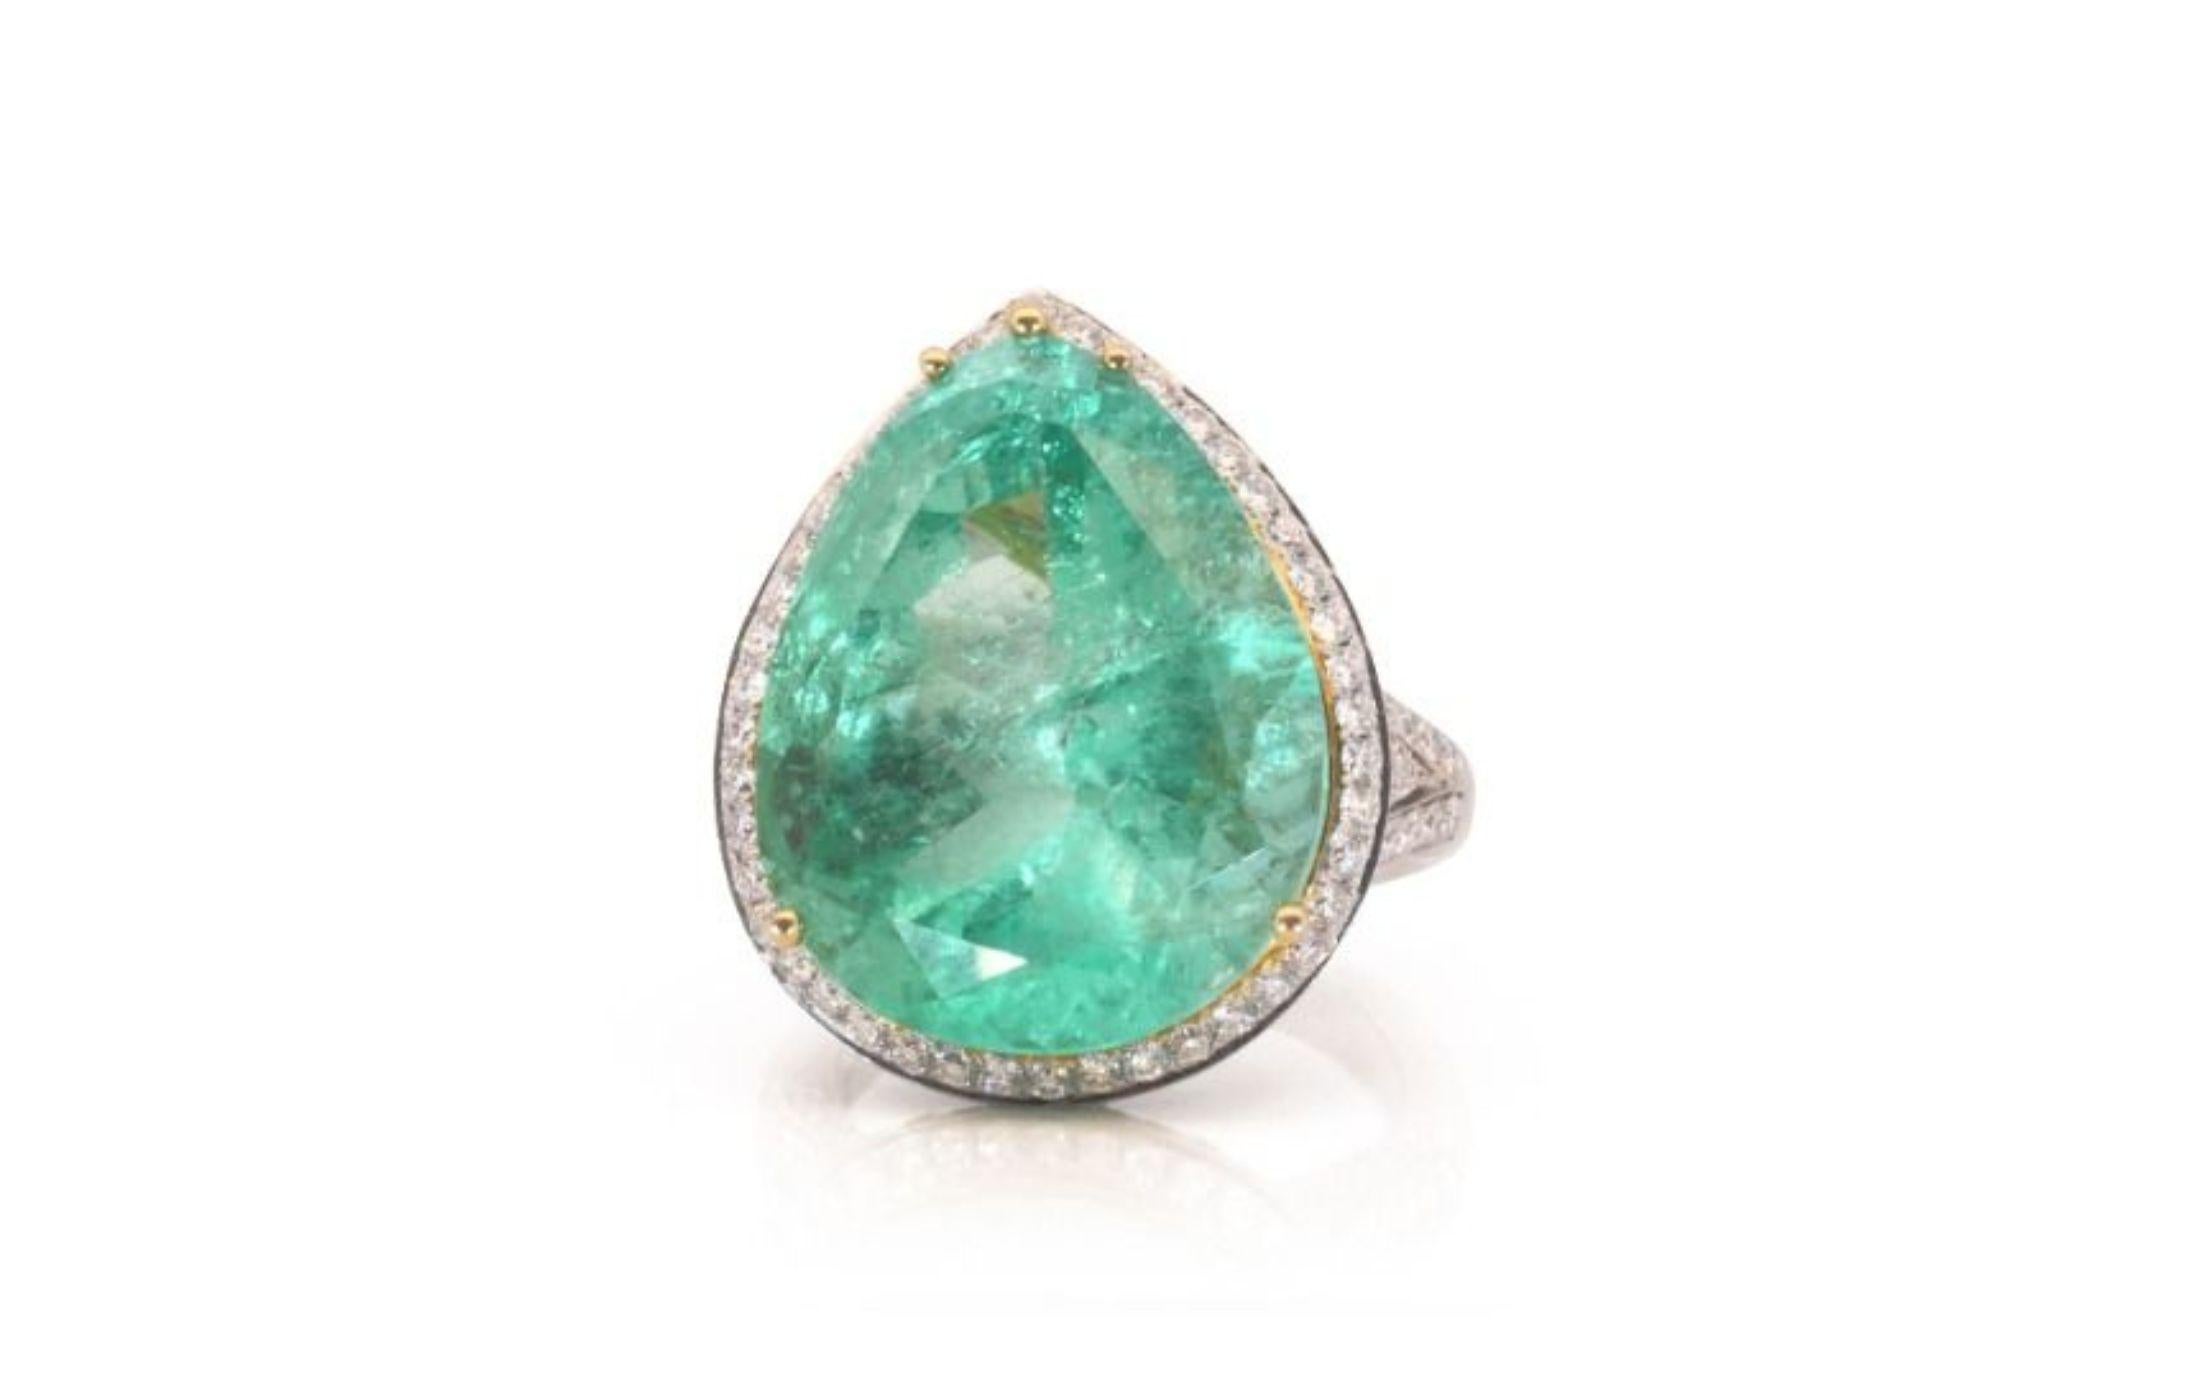 Gorgeous 15ct. Pear Shape Emerald Ring

Product Details:

Metal: 18K White Gold

Main stone: 
15ct pear shape natural emerald
green colour
transparent clarity

Side stones:
17.01ct round brilliant natural diamond
H colour
SI1 clarity

SKU: